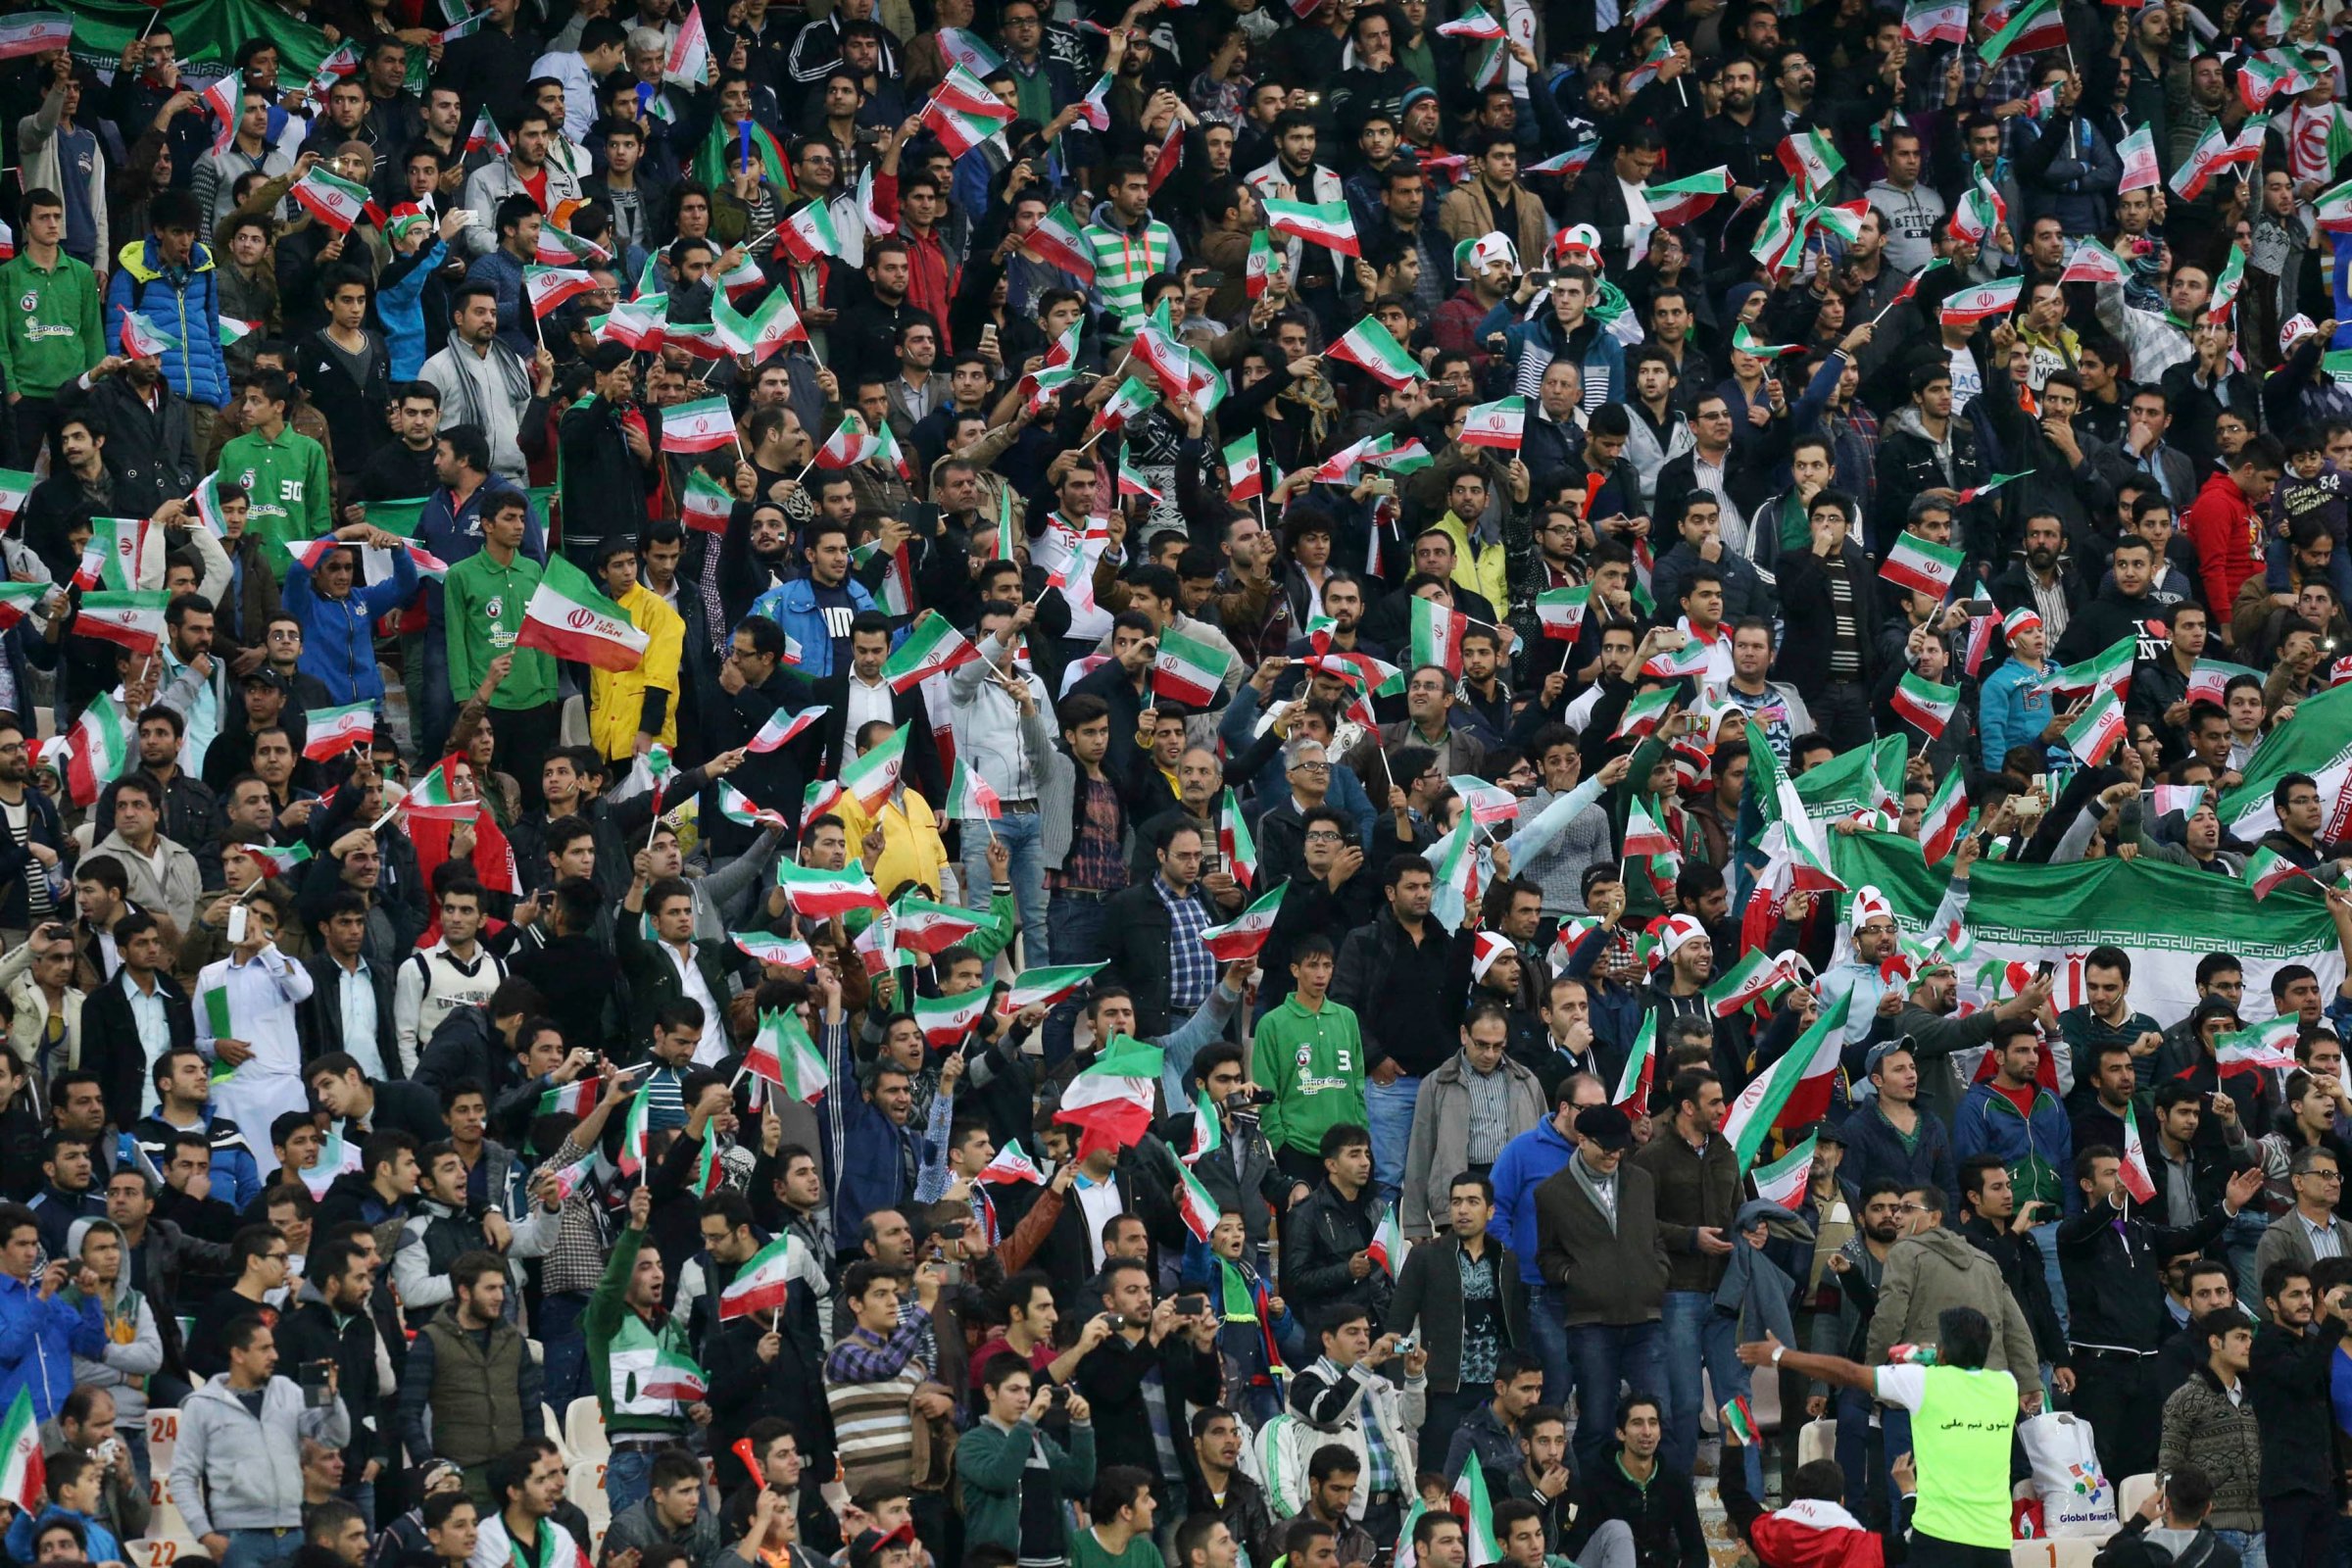 Iranian soccer supporters wave their country's flag following a friendly match at the Azadi, (freedom) stadium in Tehran, Iran on Nov. 18, 2014.